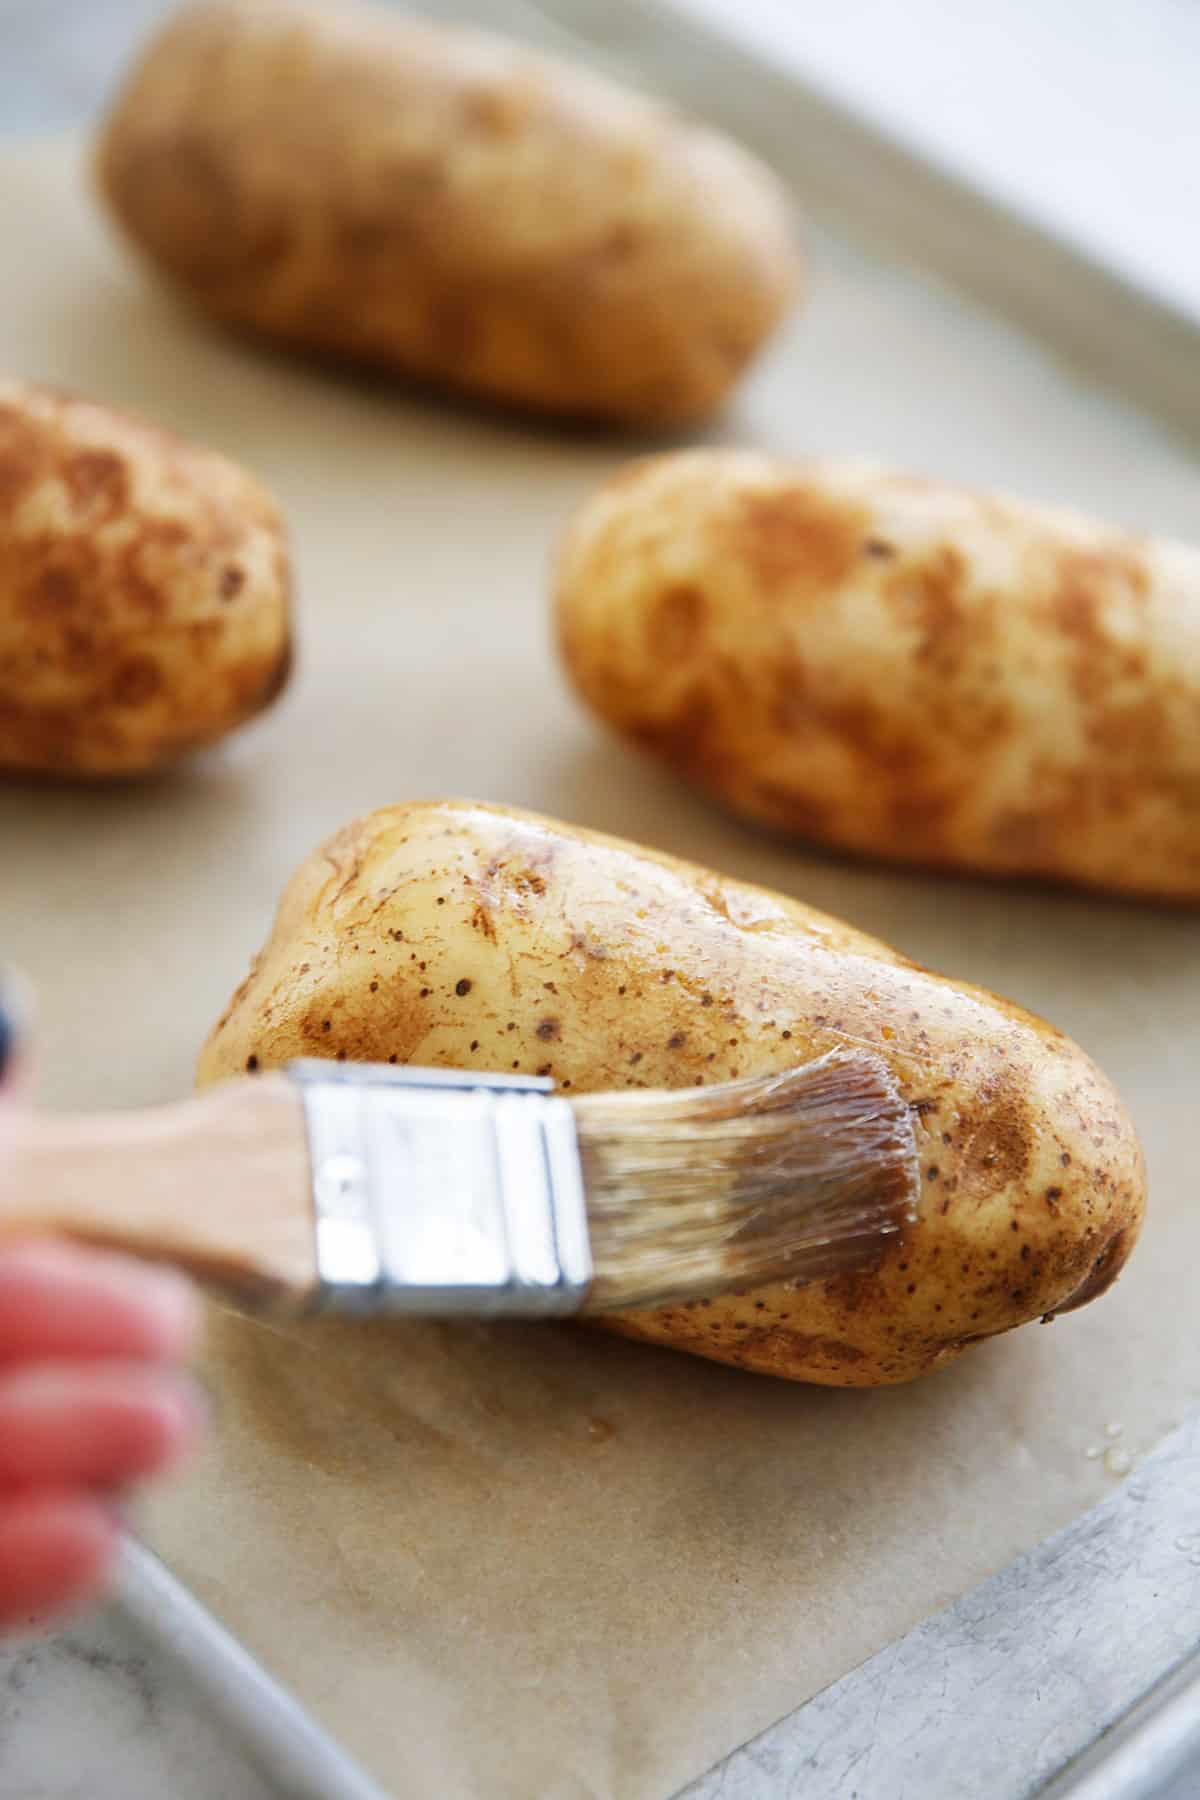 Brushing on oil on a russet potato.